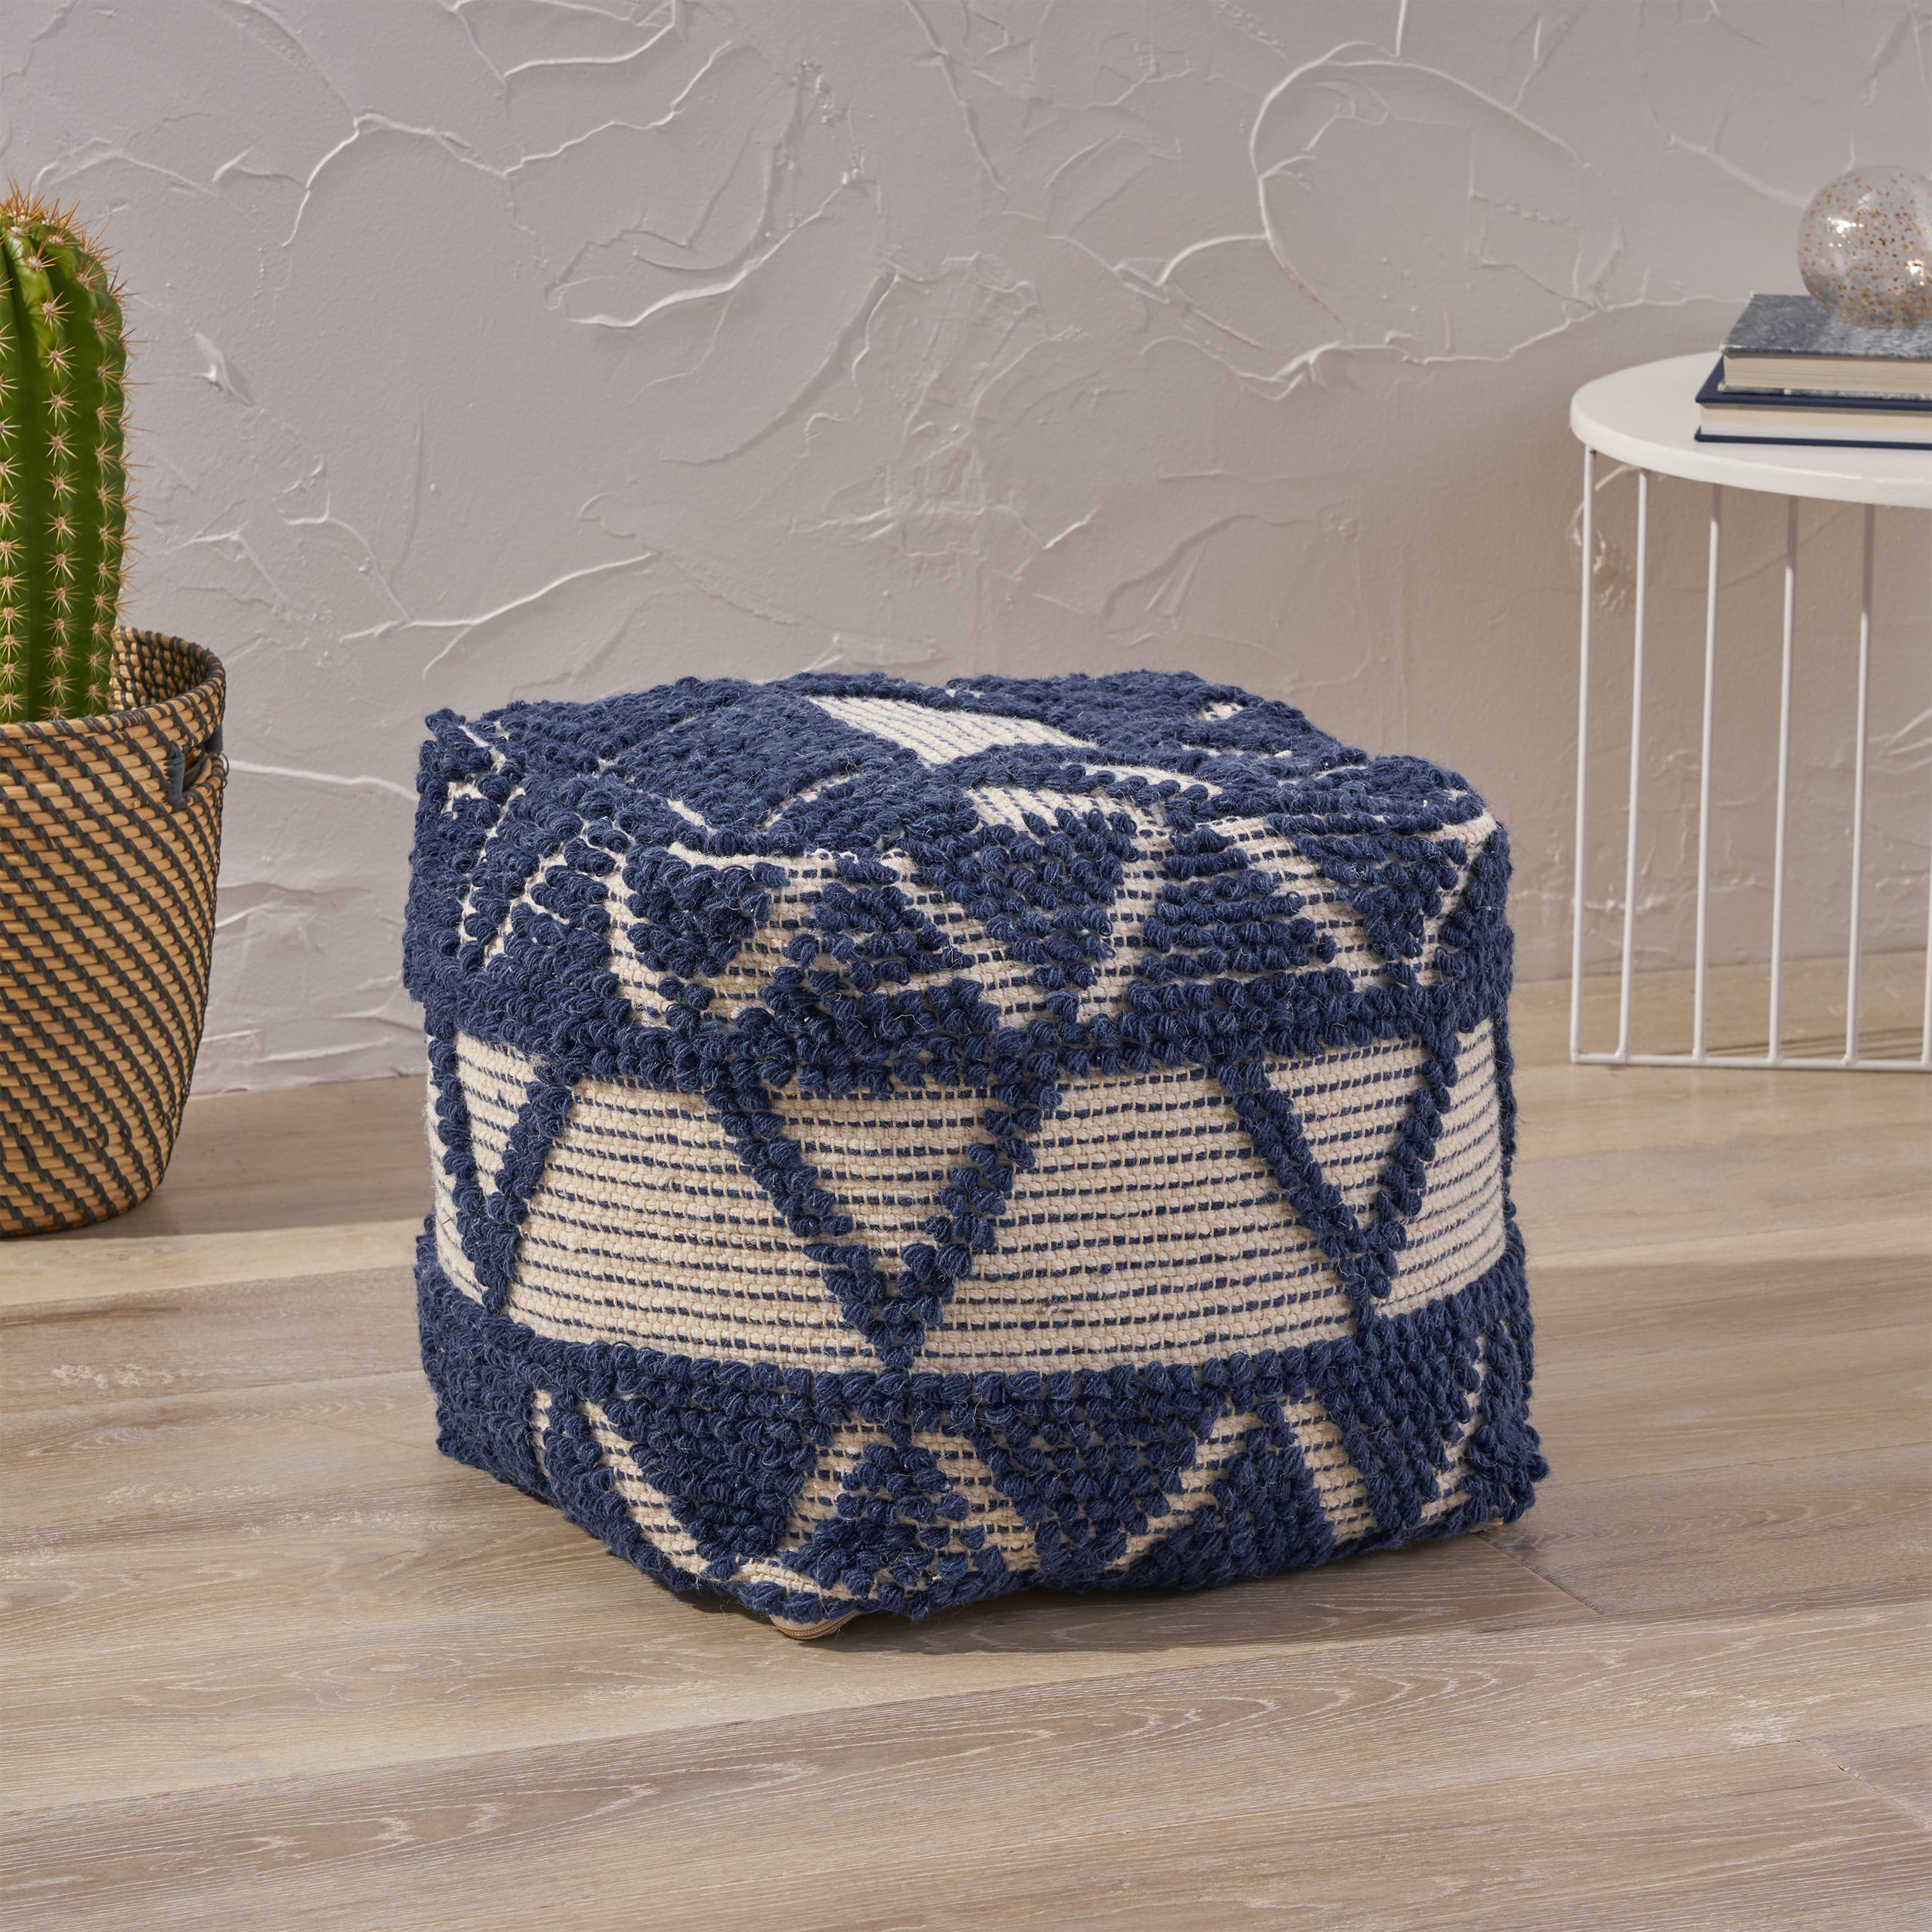 Buy 3 Get1 FREE White Beni Ourain Pure Wool Foot Stool Details about   Ottoman Pouf Seating